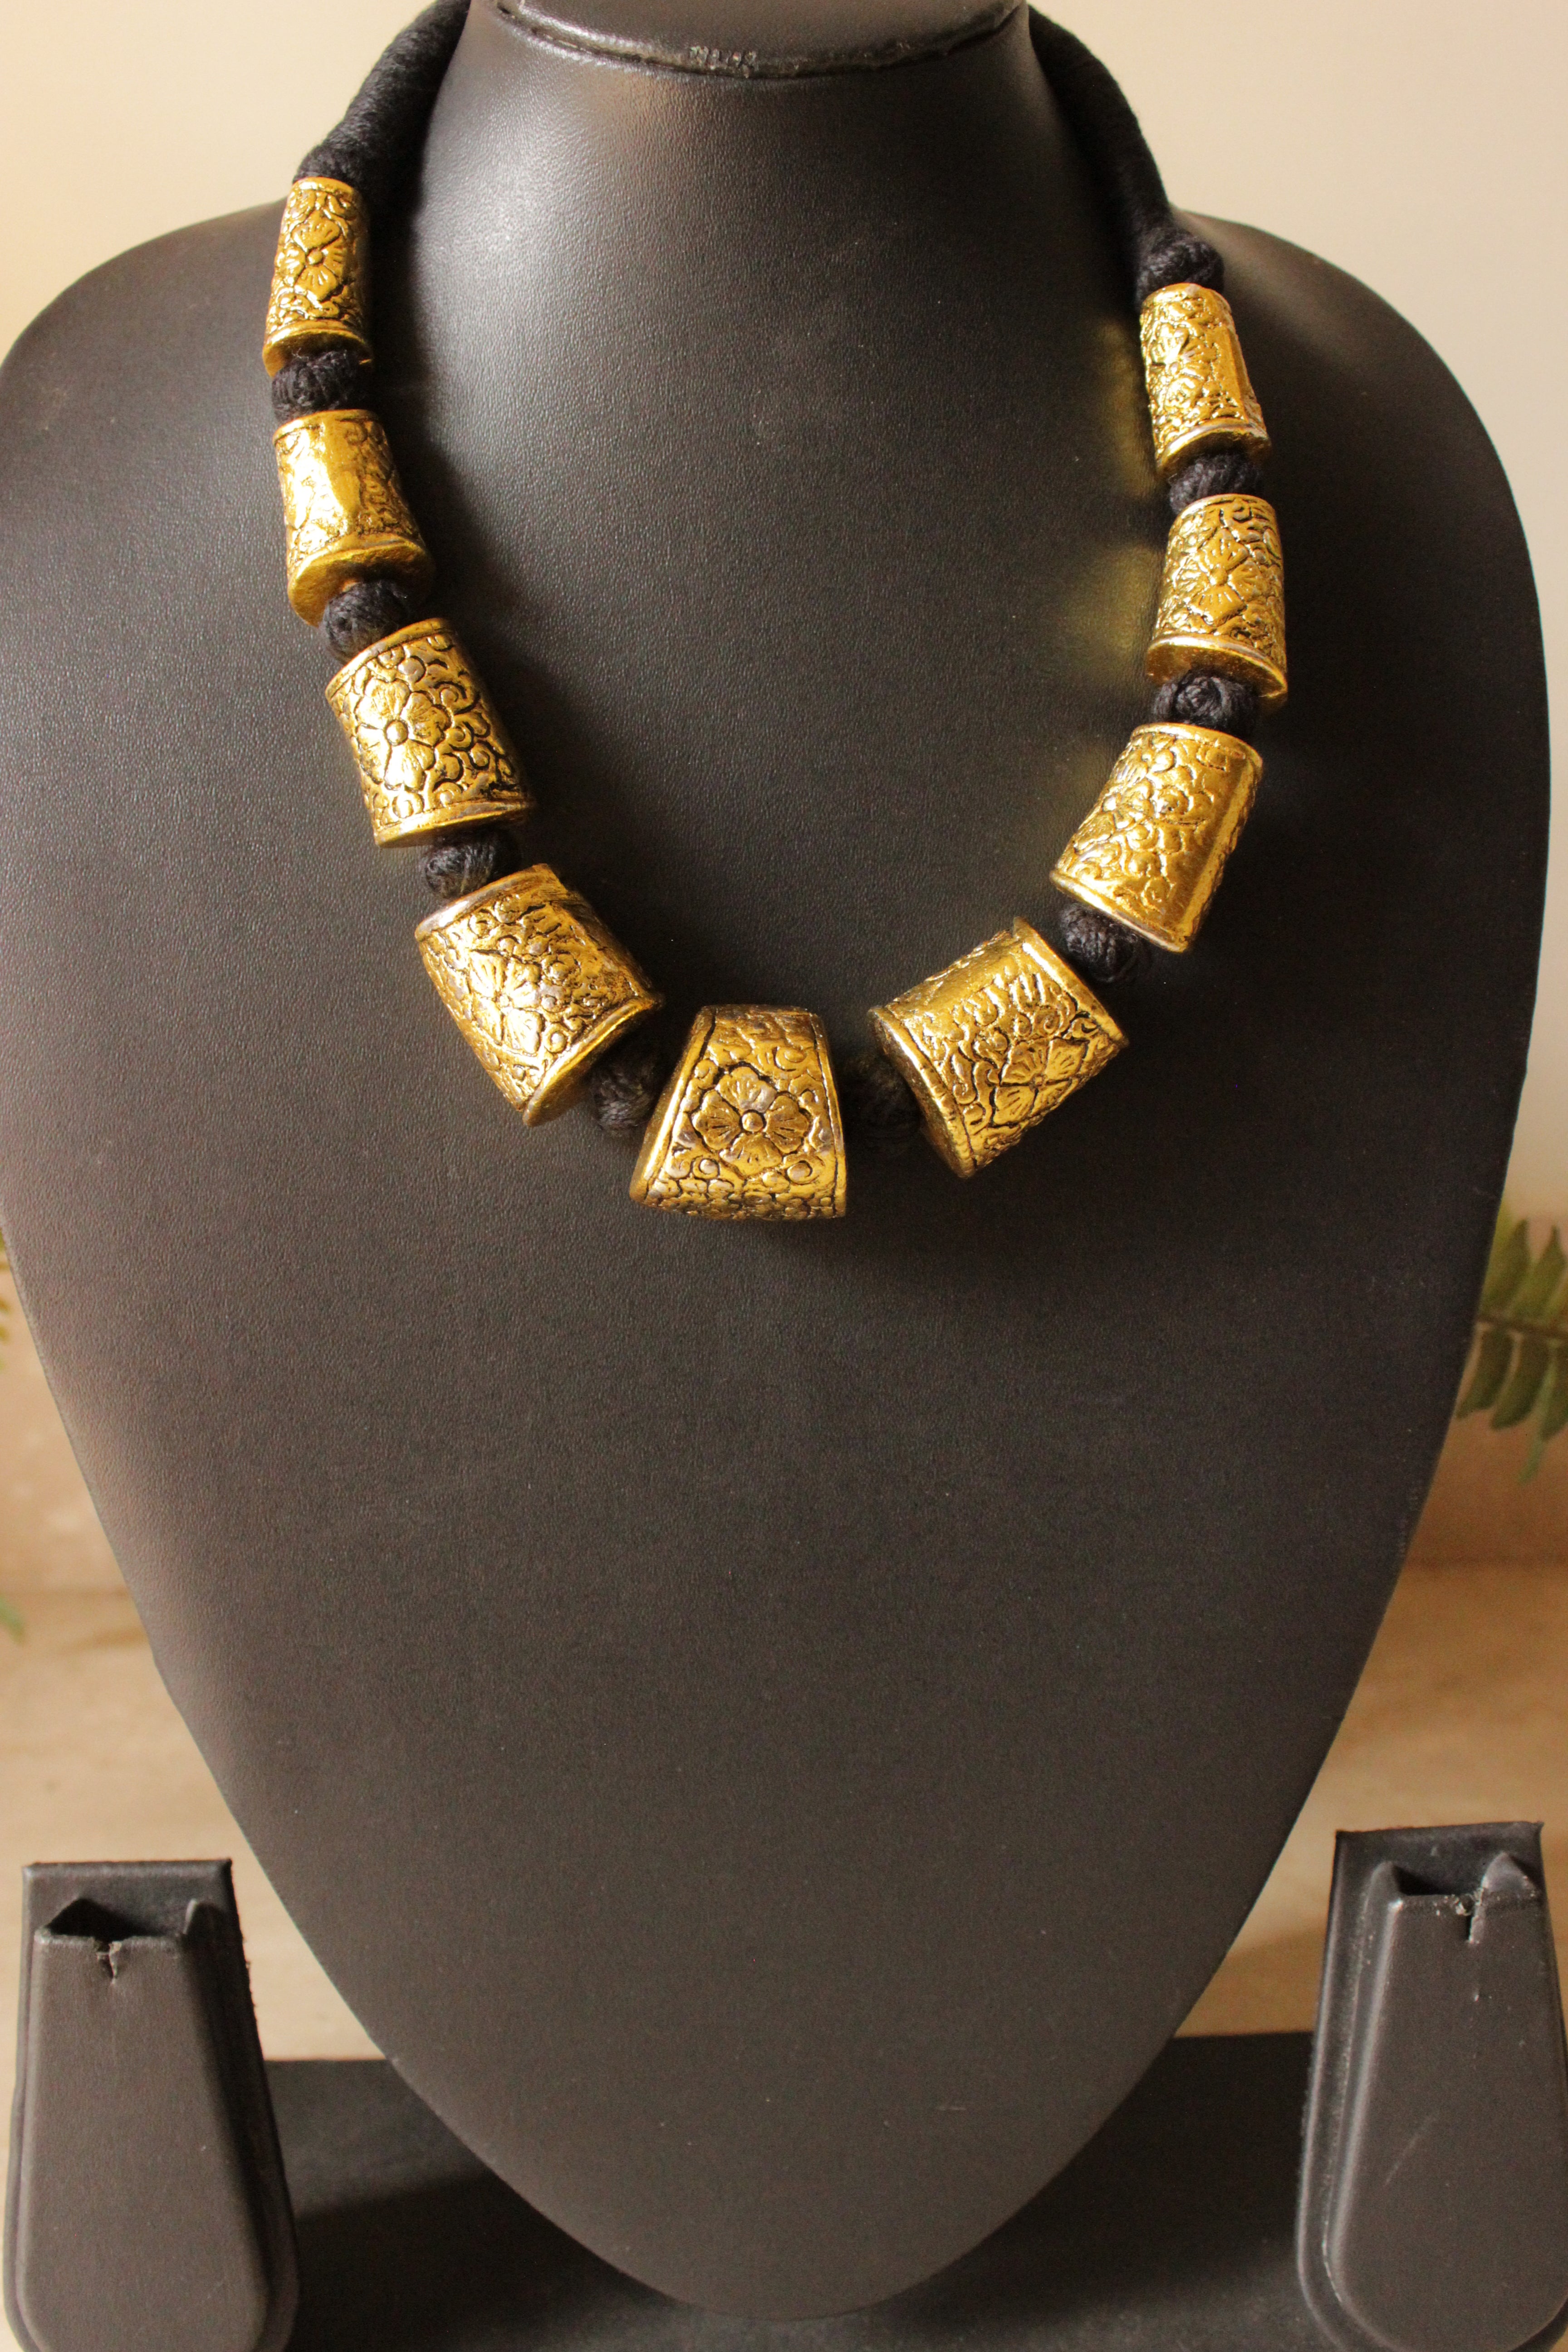 Cotton Thread and Metal Alloy Beads Matt Gold Finish Necklace